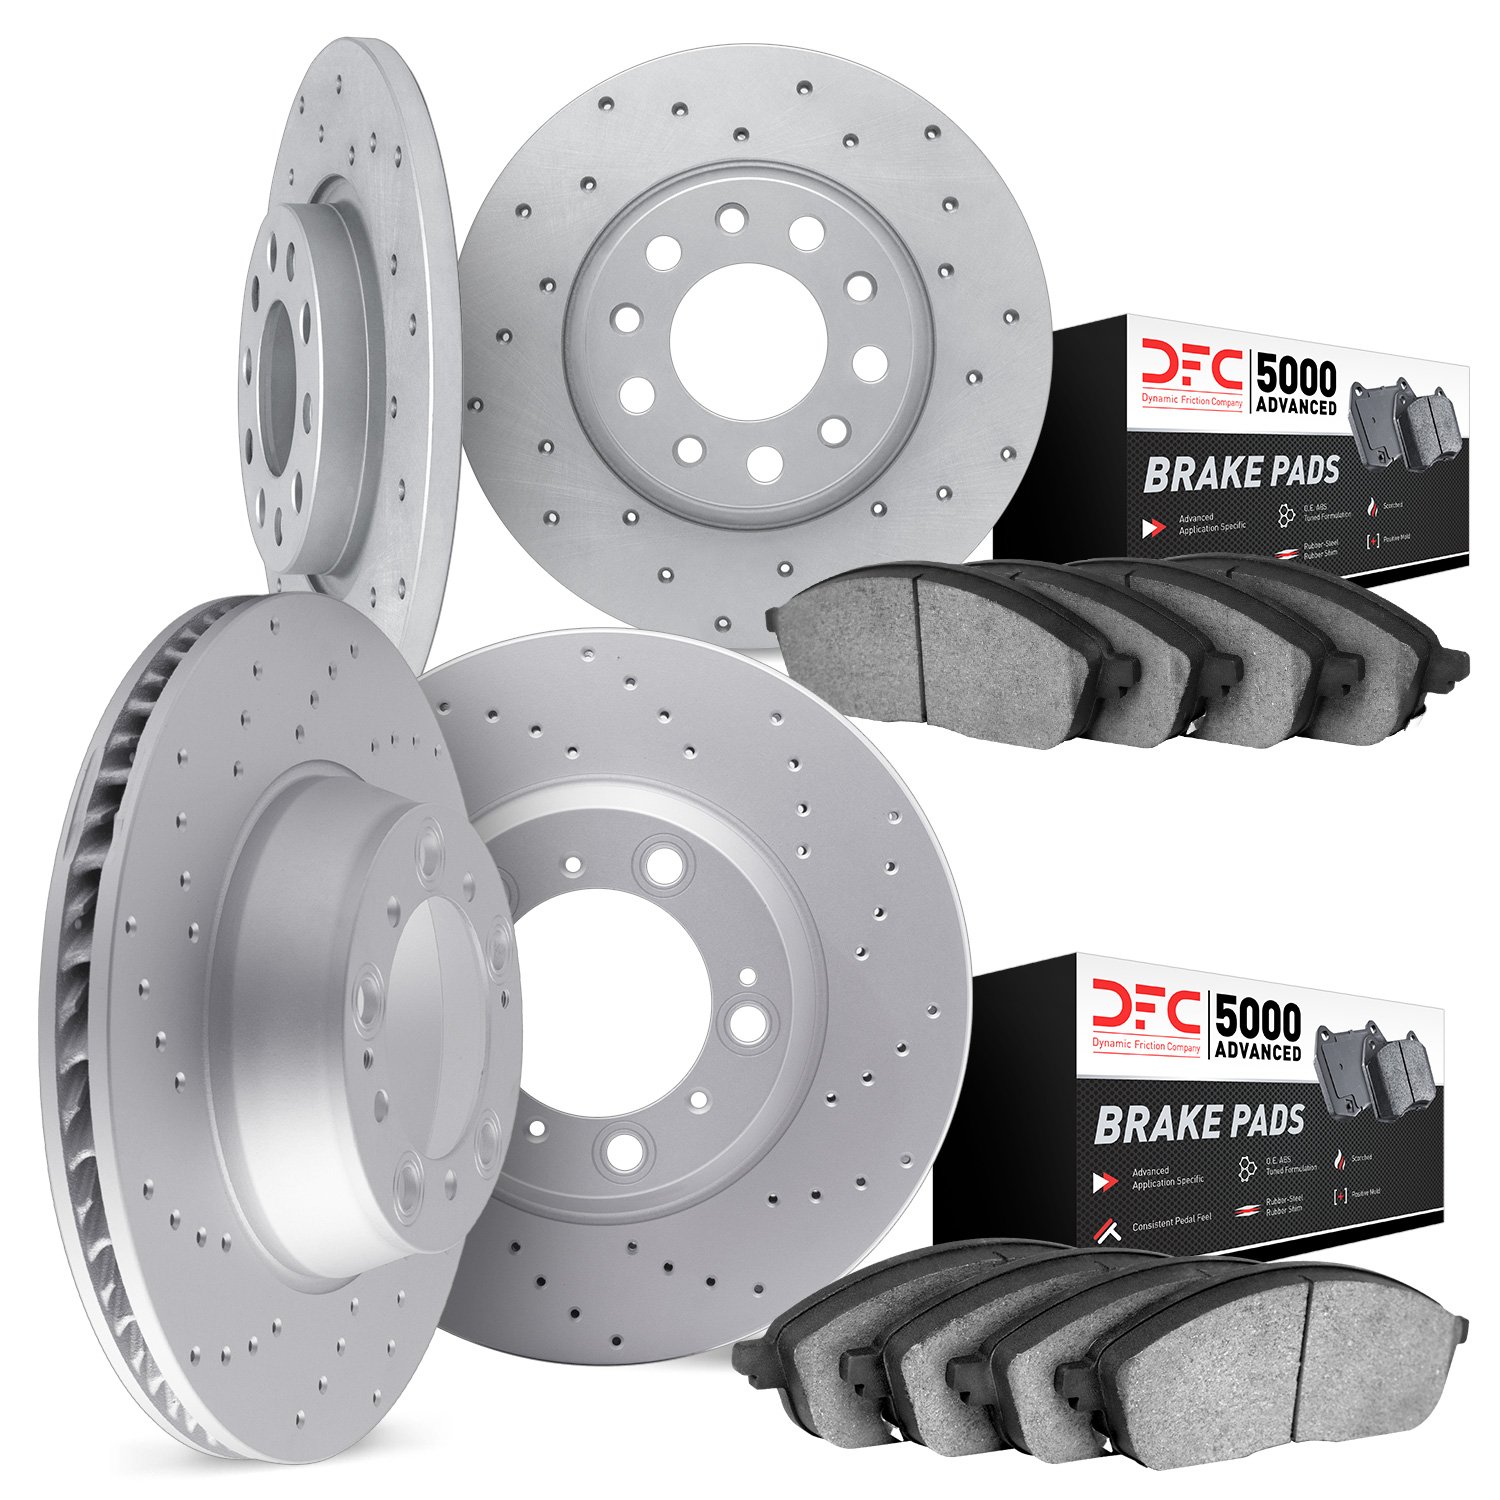 2704-75018 Geoperformance Drilled Brake Rotors with Active Performance Pads Kit, 2006-2010 Lexus/Toyota/Scion, Position: Front a